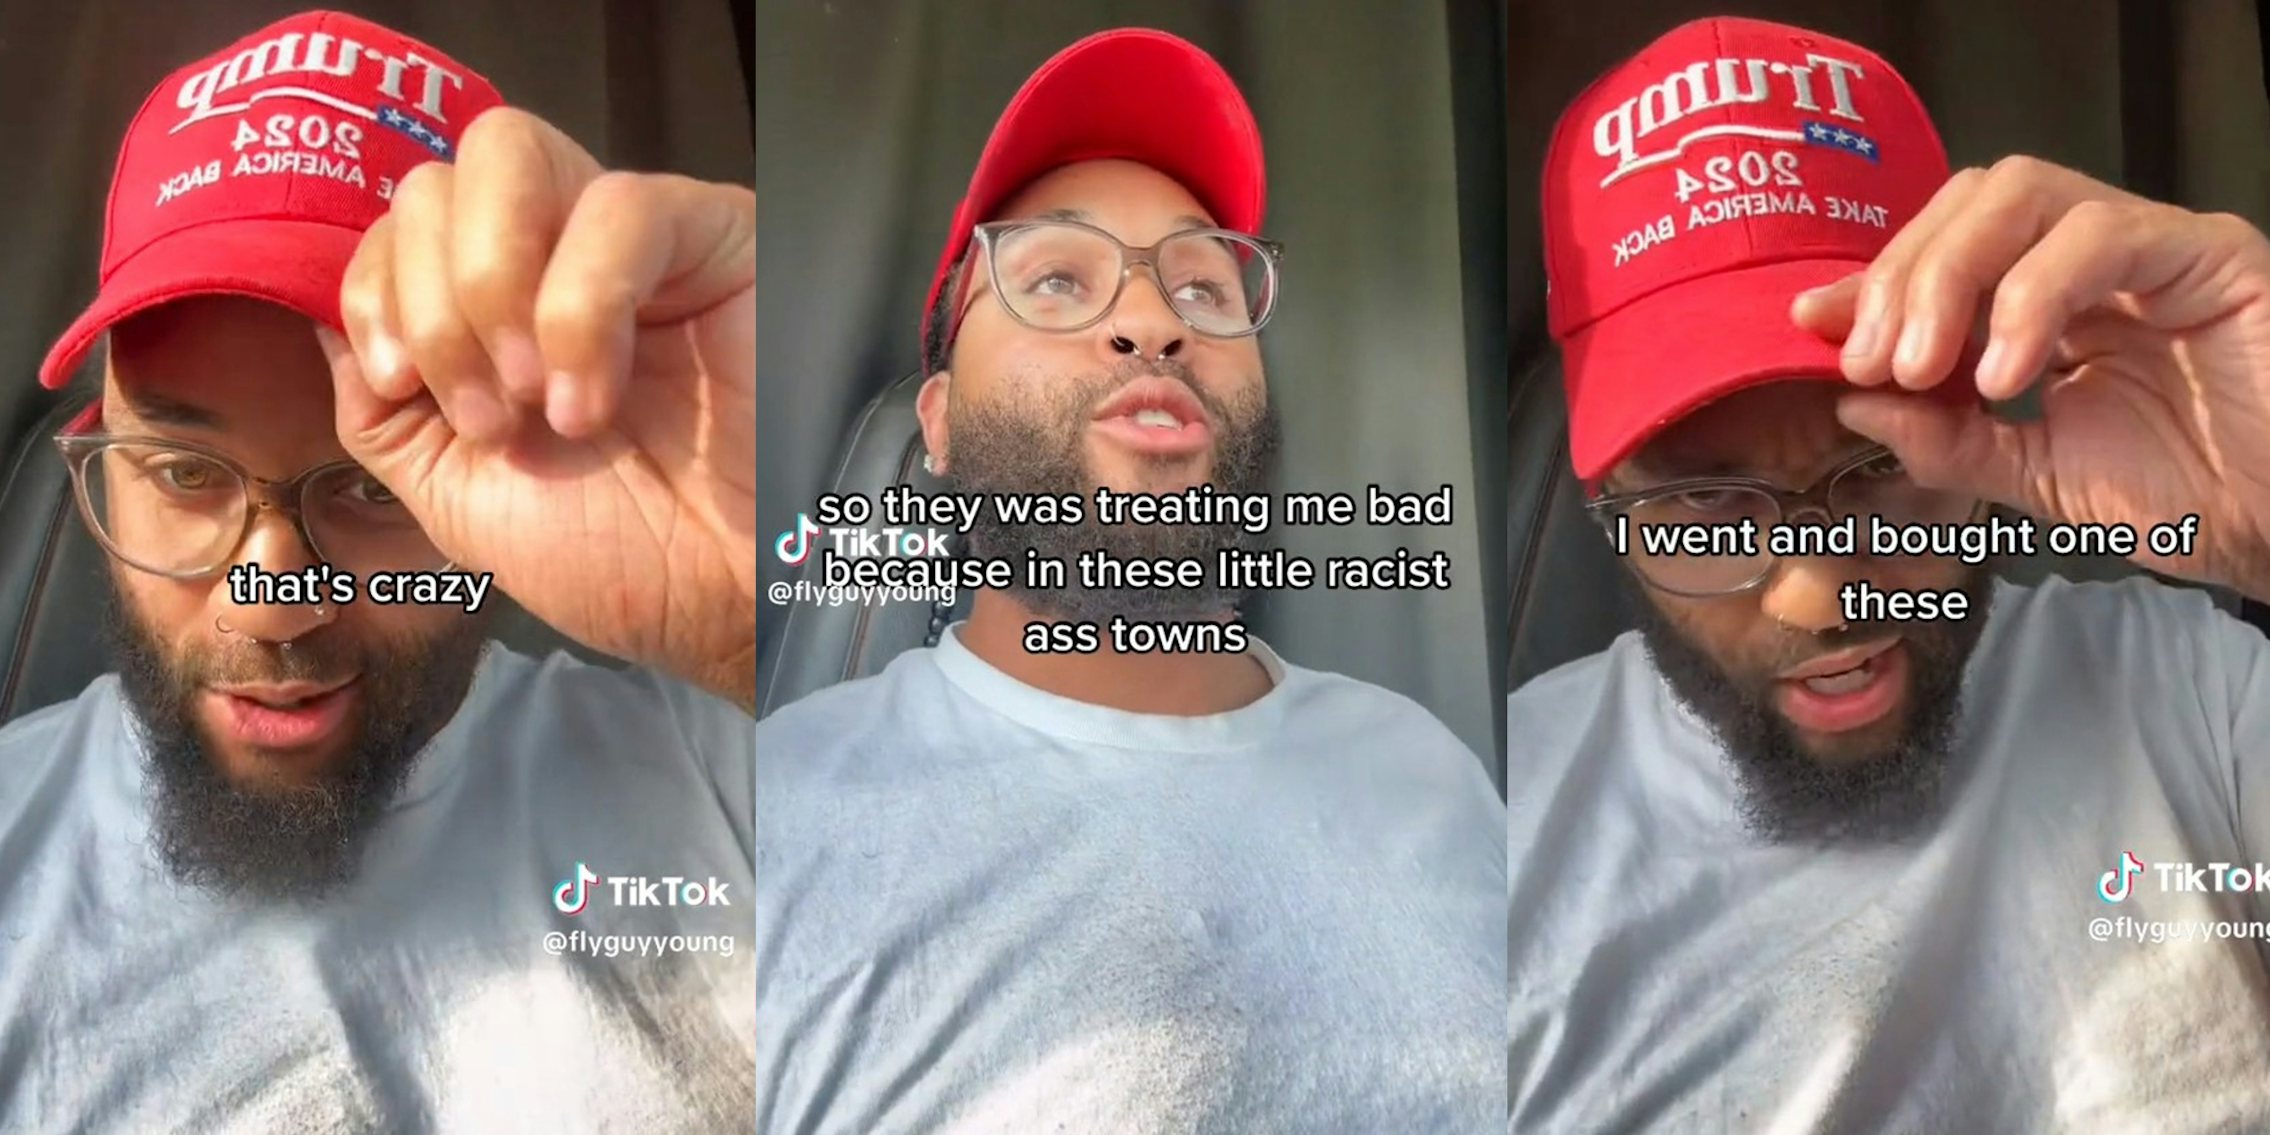 Truck driver explains he has to wear Trump 2024 hat in order to blend in with racist towns